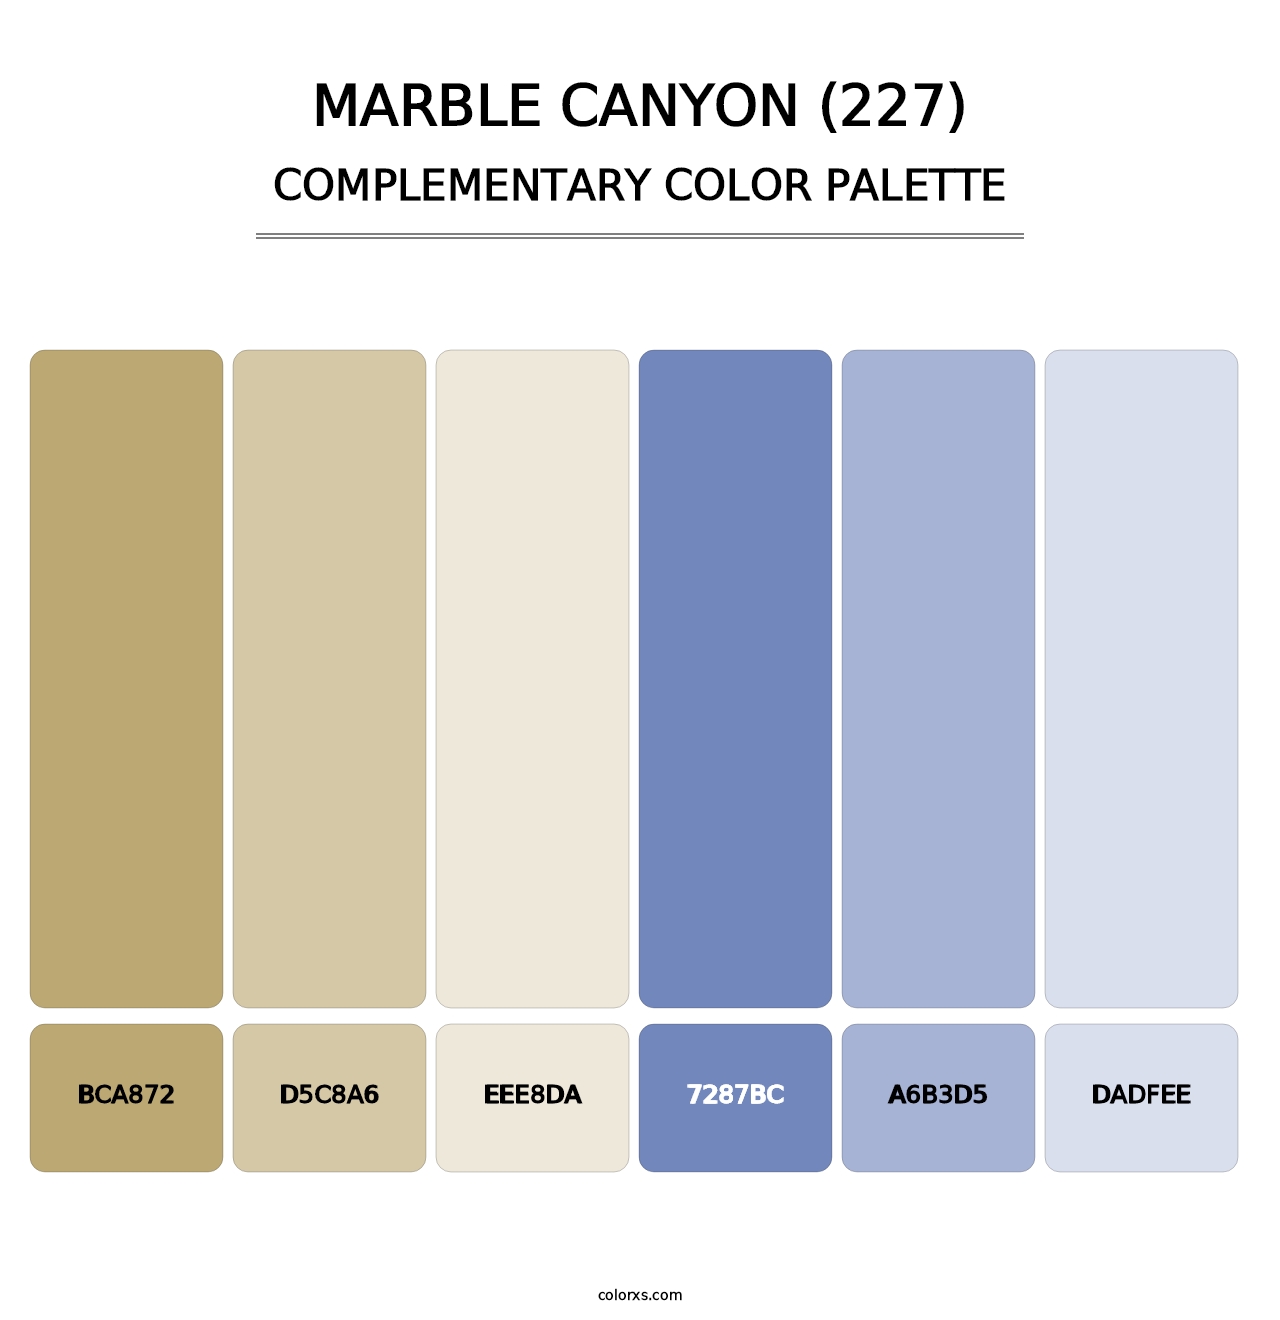 Marble Canyon (227) - Complementary Color Palette